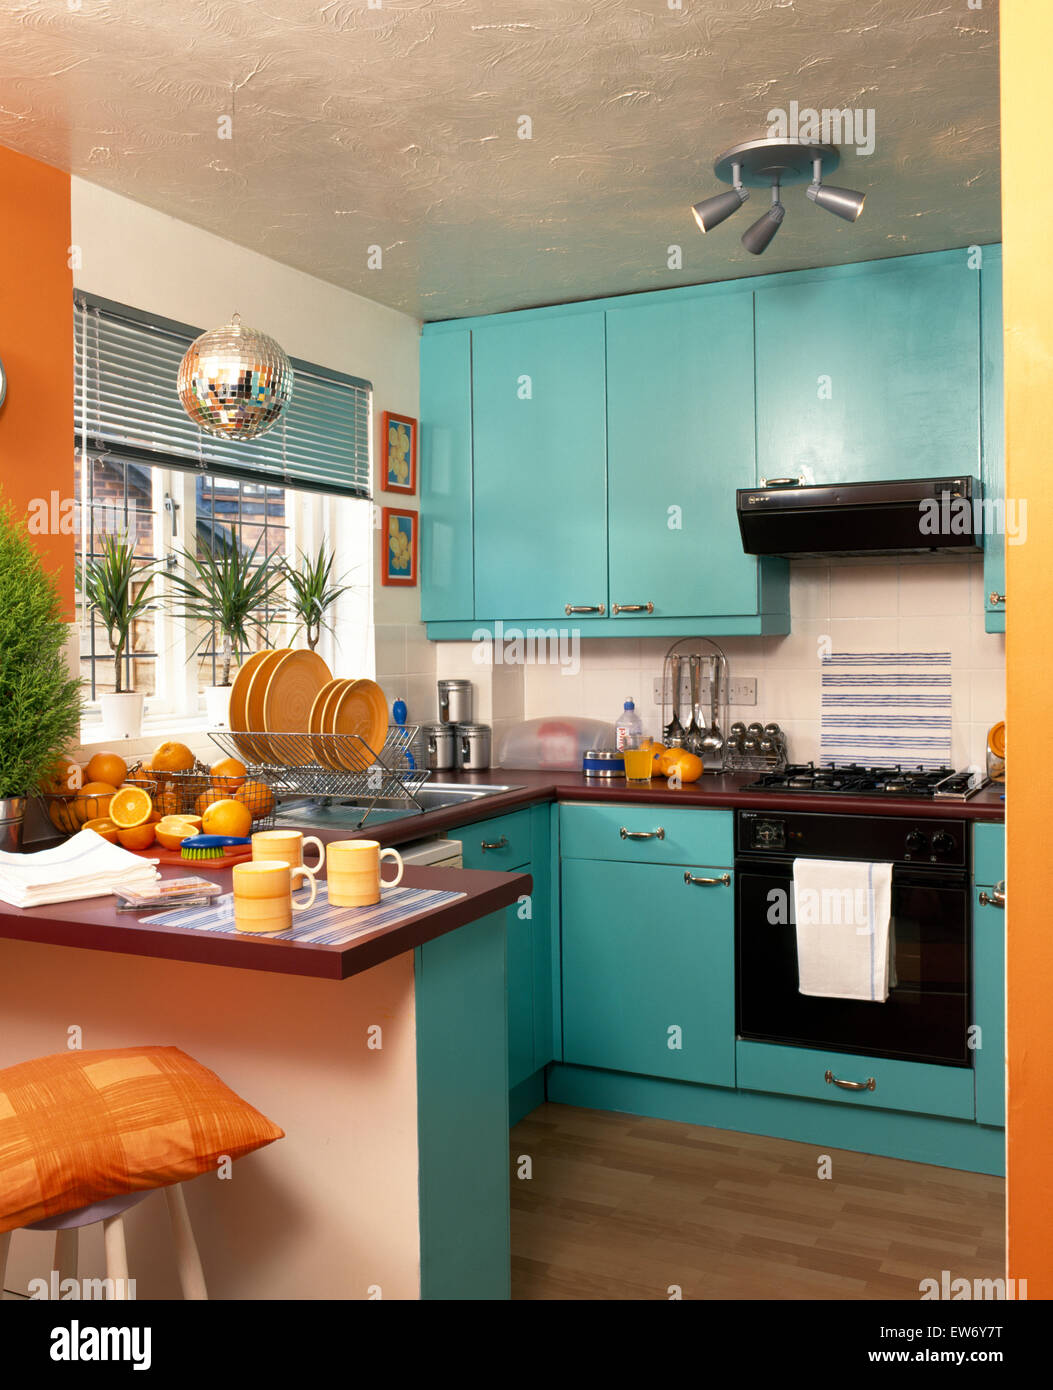 Turquoise doors on fitted units in nineties economy style kitchen Stock Photo